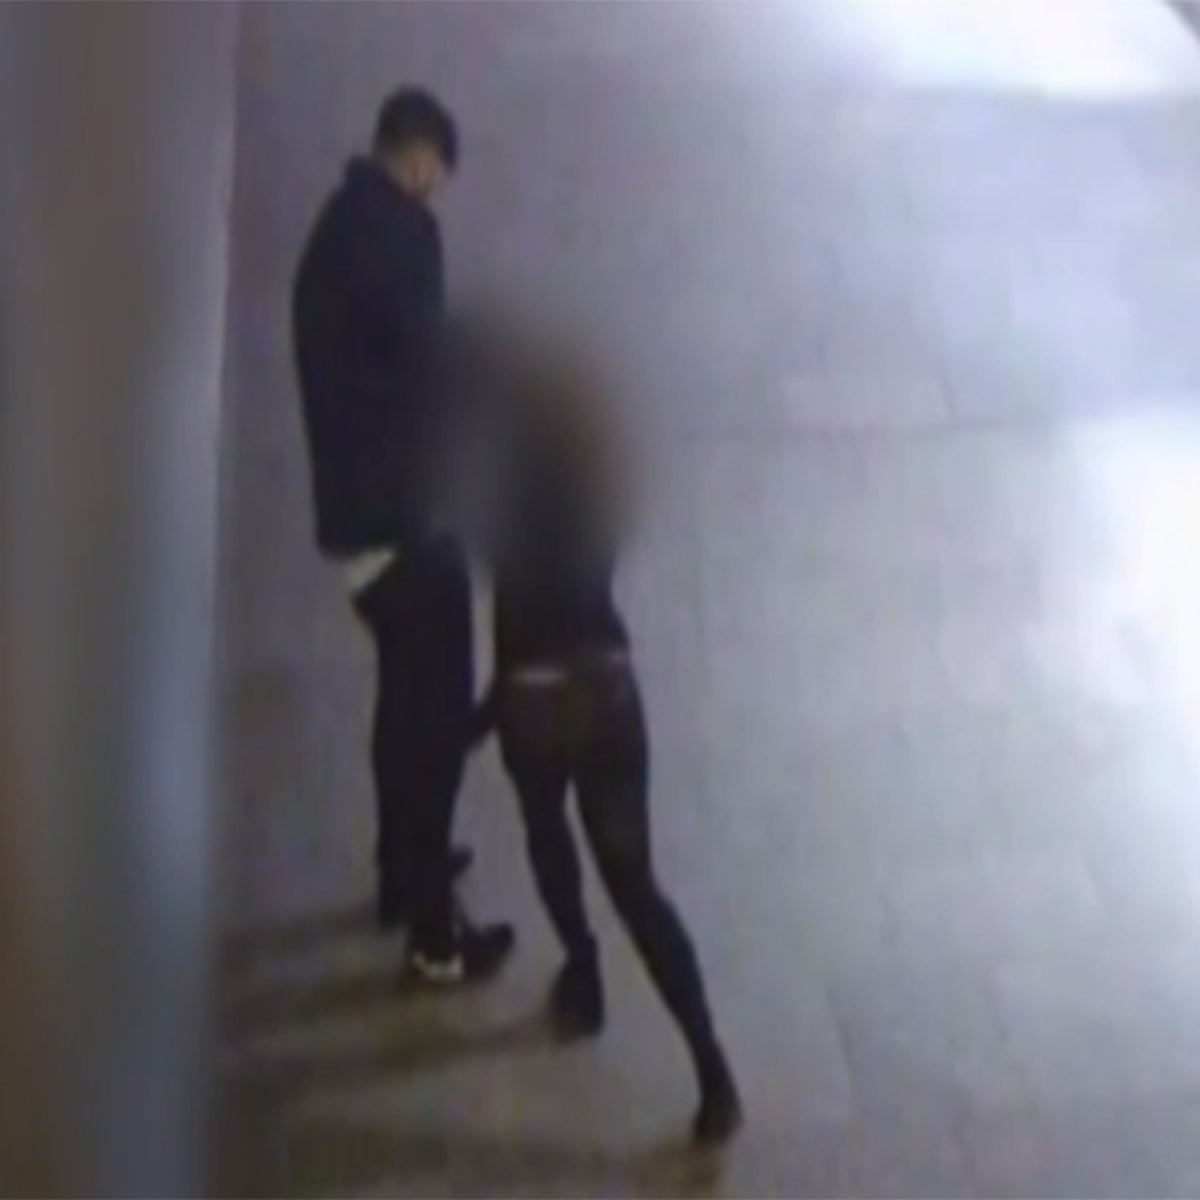 Xxxz Rape Video - City worker caught on CCTV dragging teenager into alley to rape her, jailed  for eight years | The Independent | The Independent